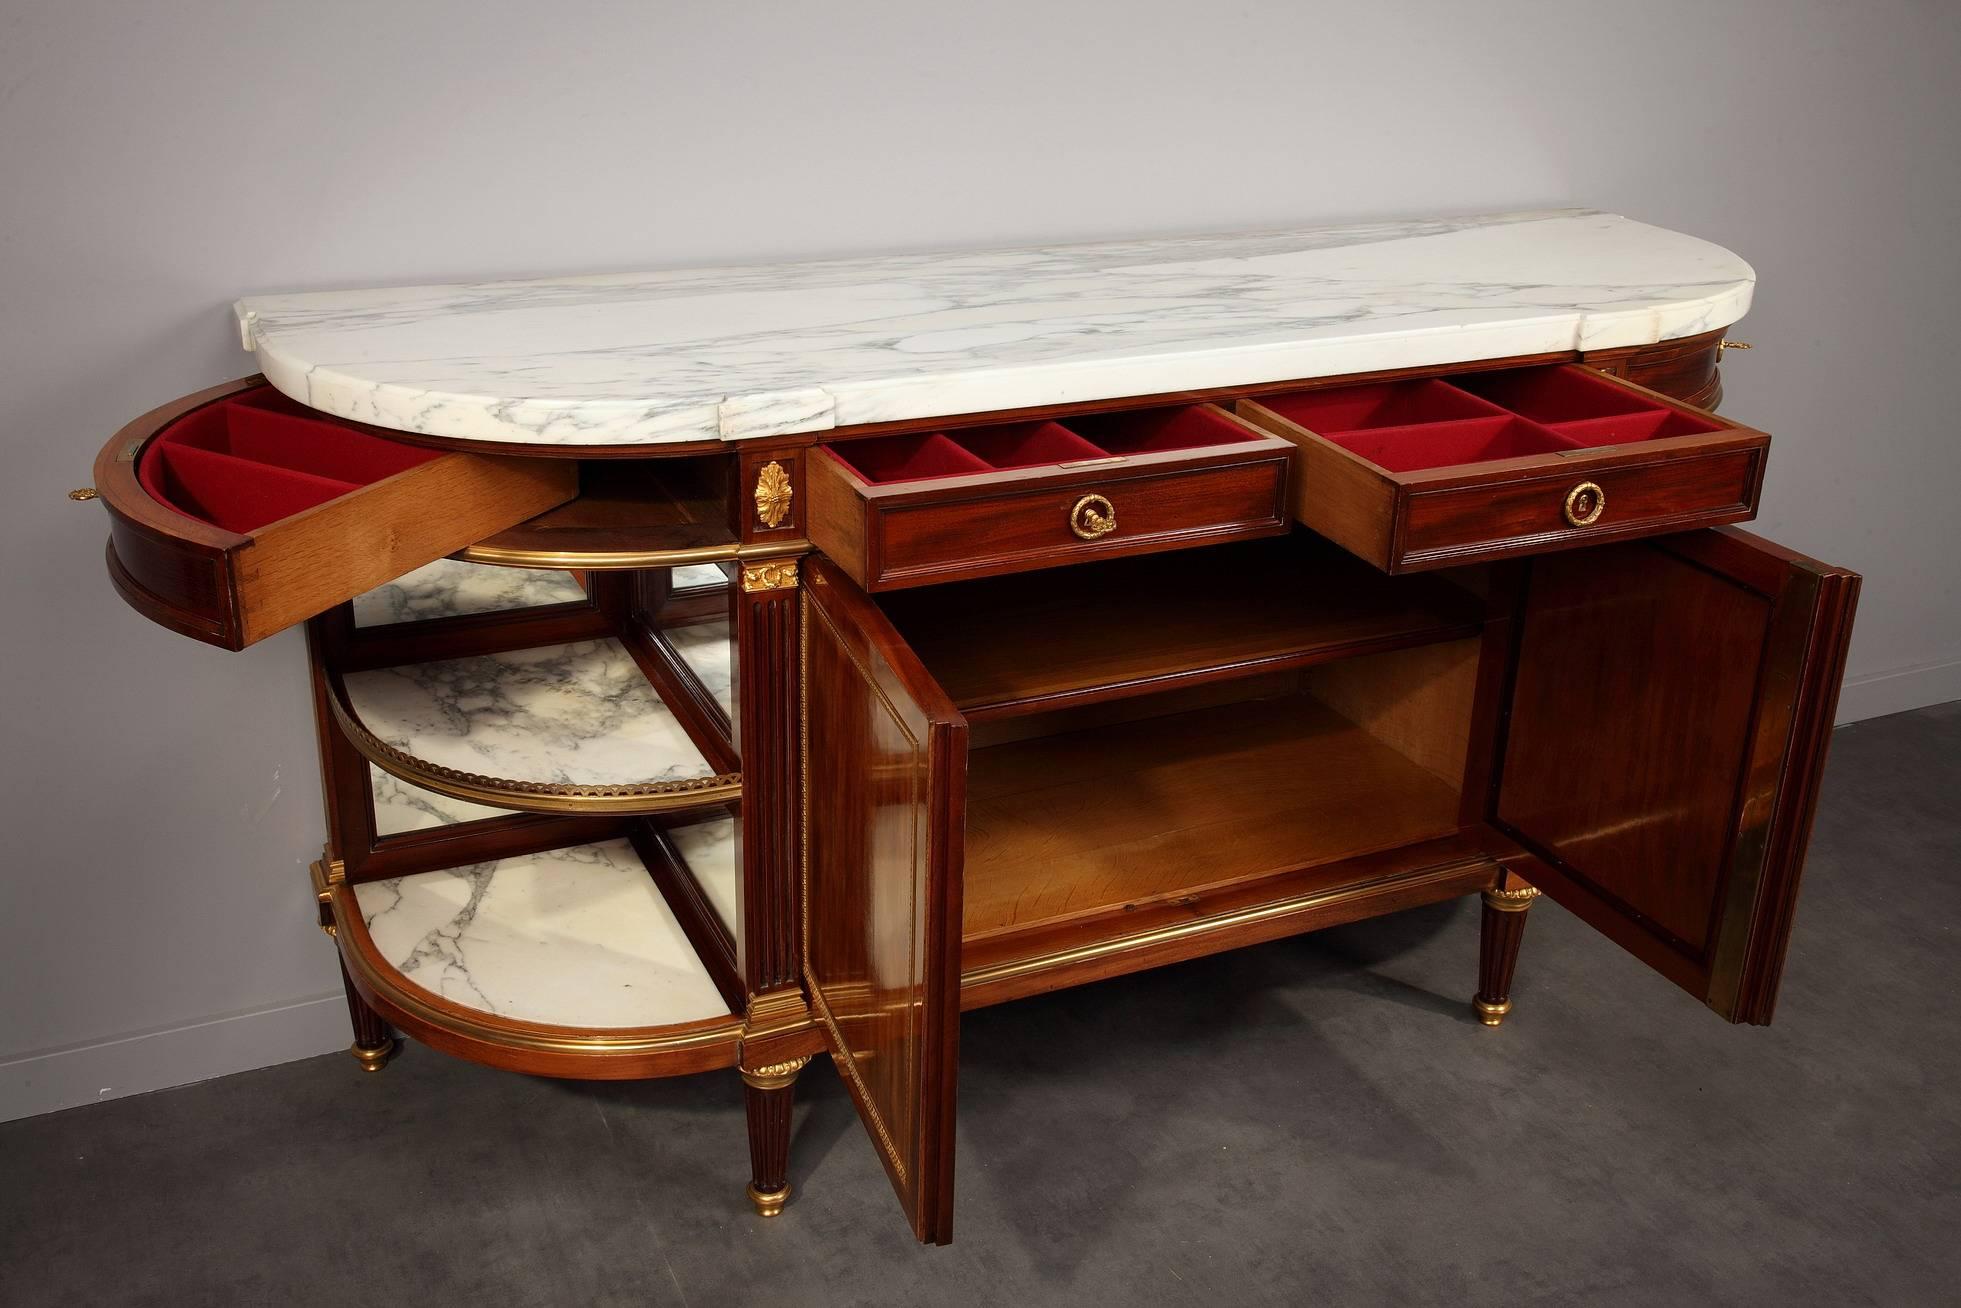 Late 19th century mahogany veneer, marble and gilt bronze dessert console. The white marble top rests on top of four shallow drawers. The slightly protruding central facade features two door that open to display a shelve. On both sides of those